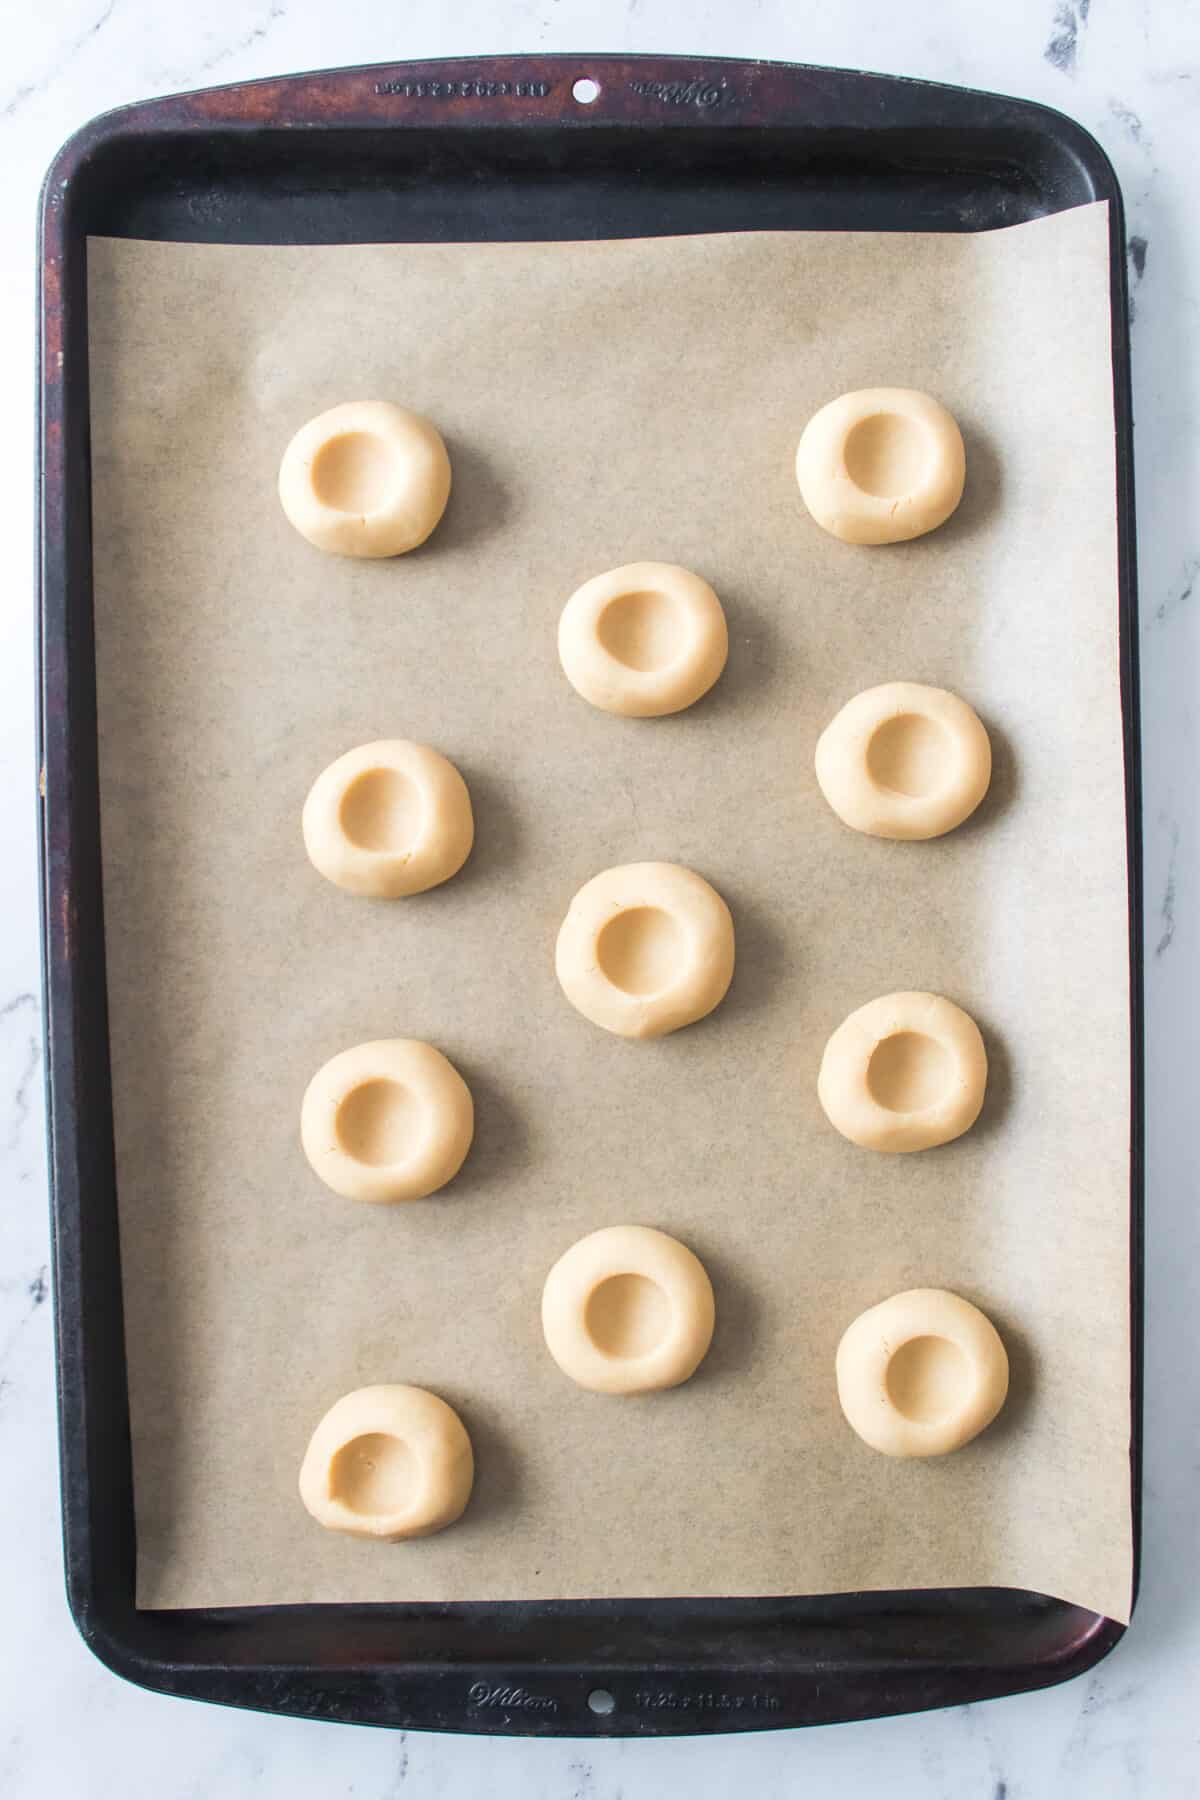 thumbprint cookies unbaked on baking sheet with indent for jam